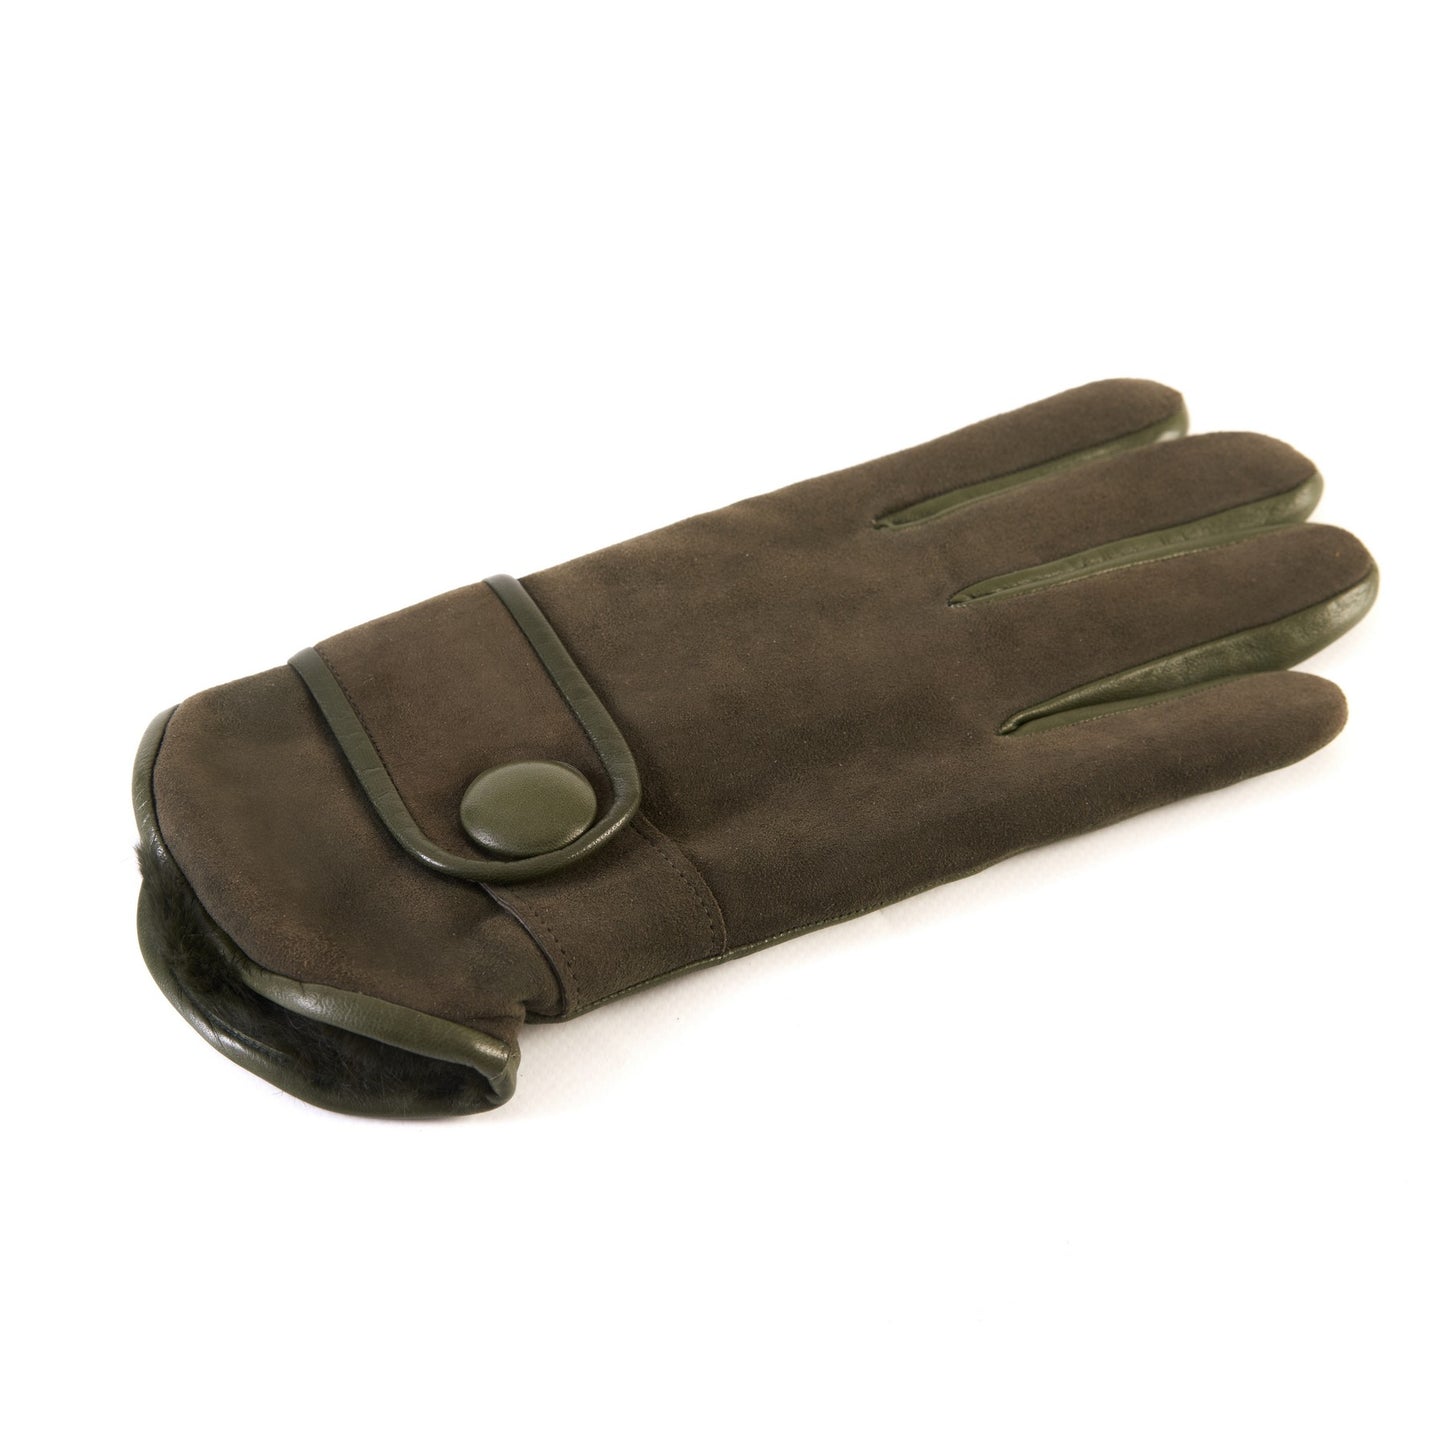 Men's green nappa and suede leather gloves with button and real fur lining